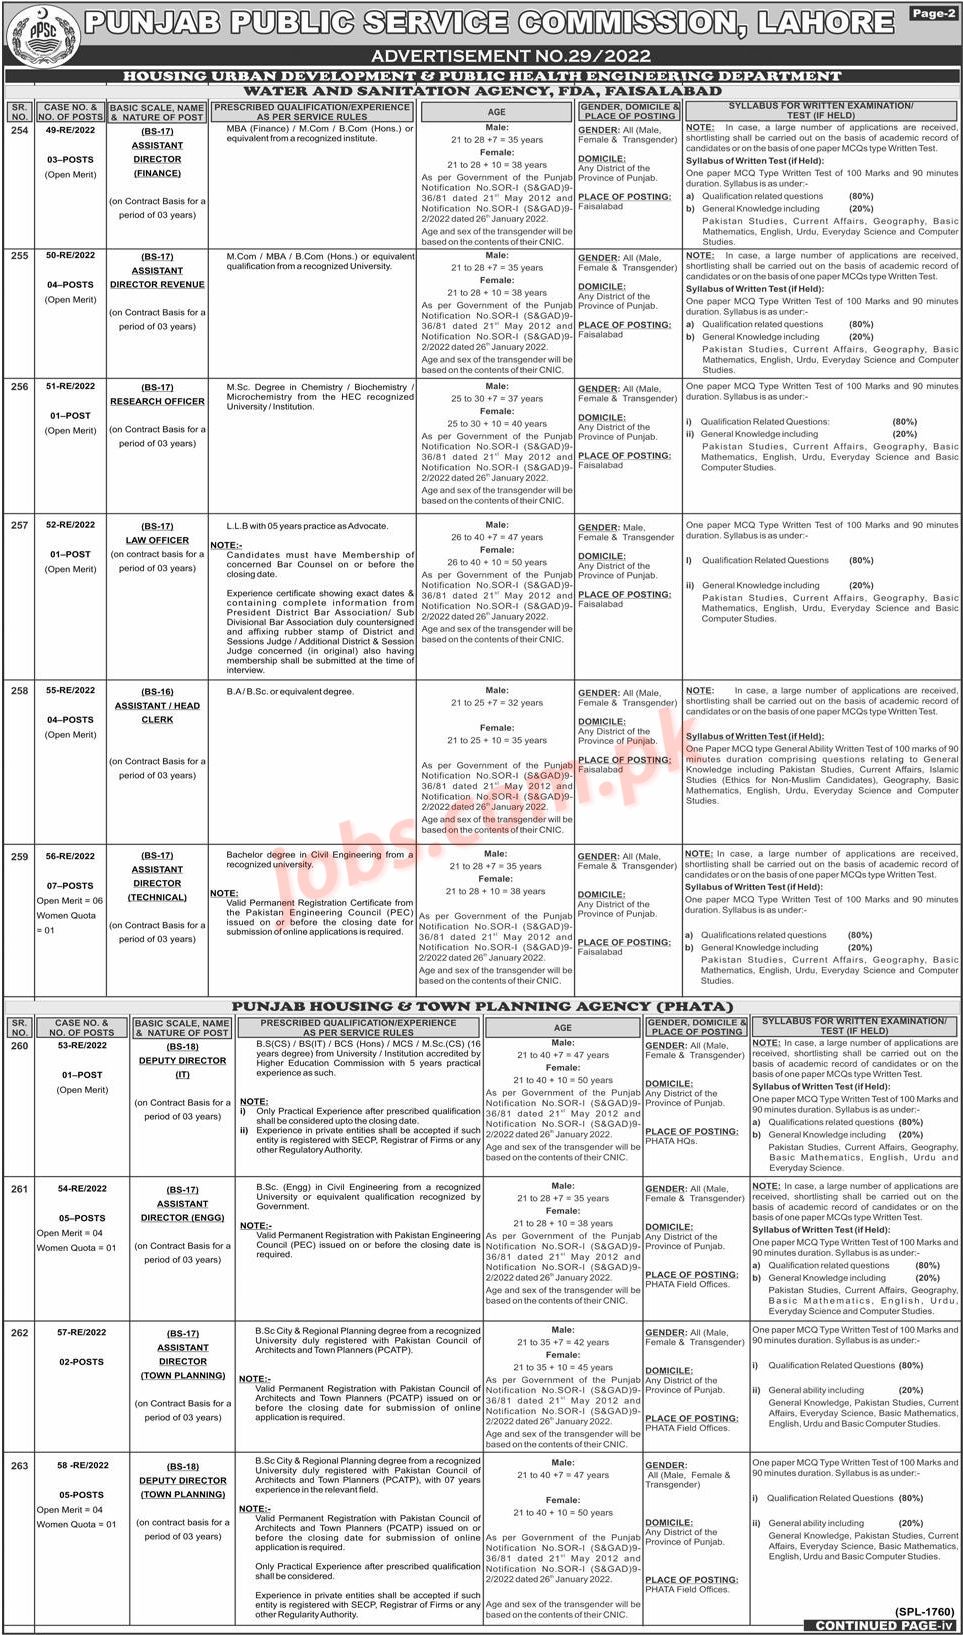 PPSC Jobs Police Inspectors and Clerks and Assistant Directors Jobs 2022